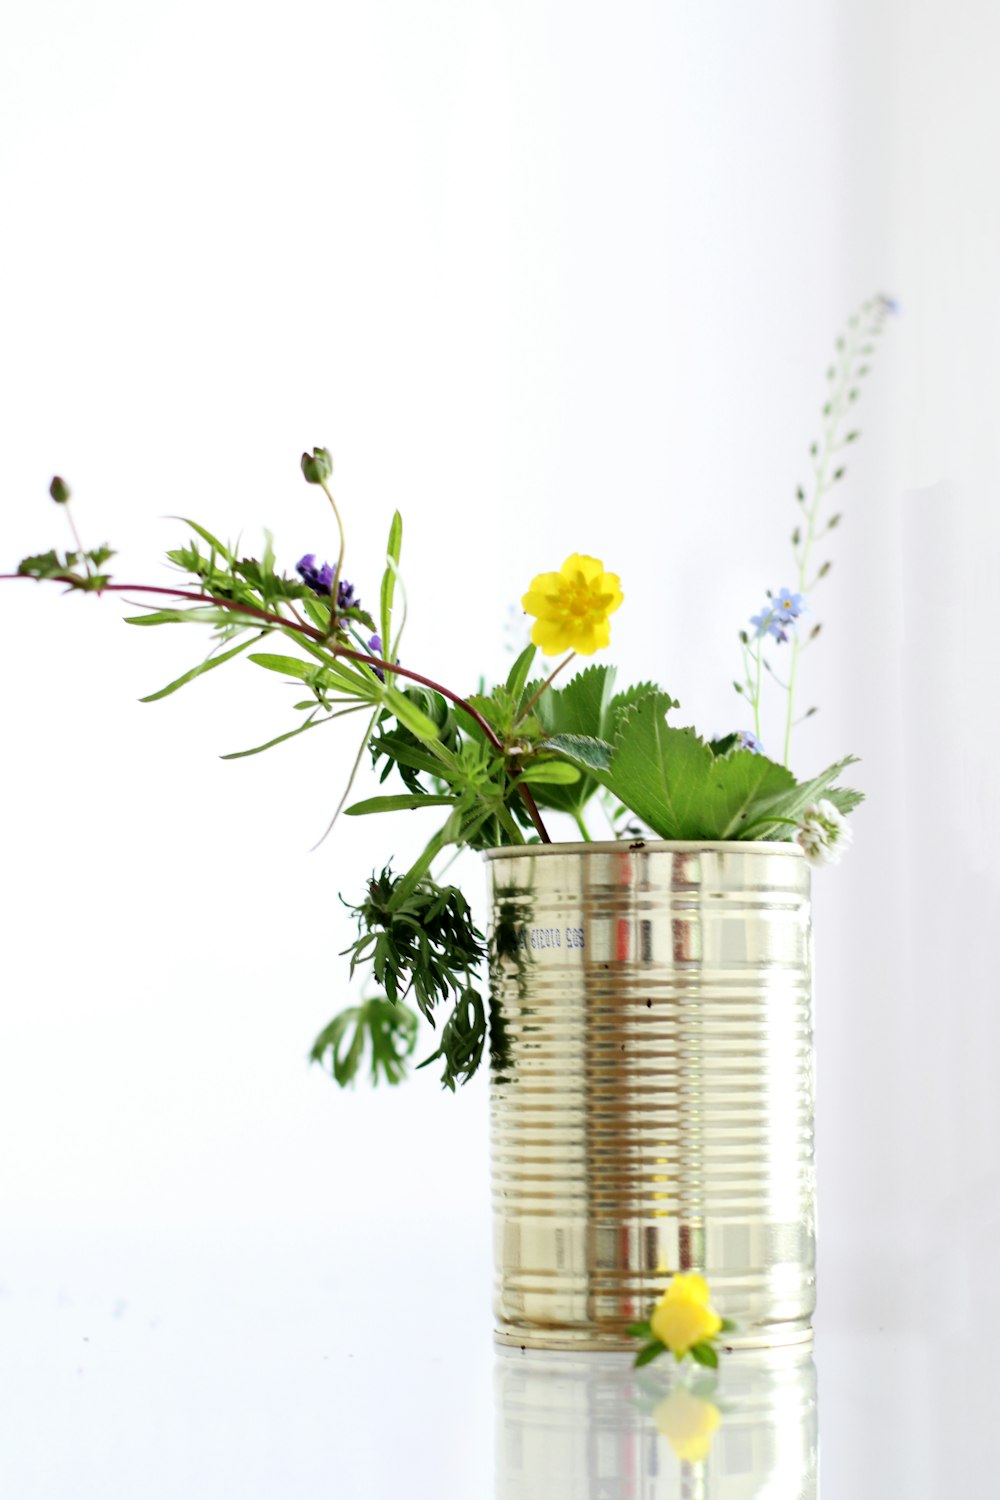 yellow petaled flower in the stainless steel can